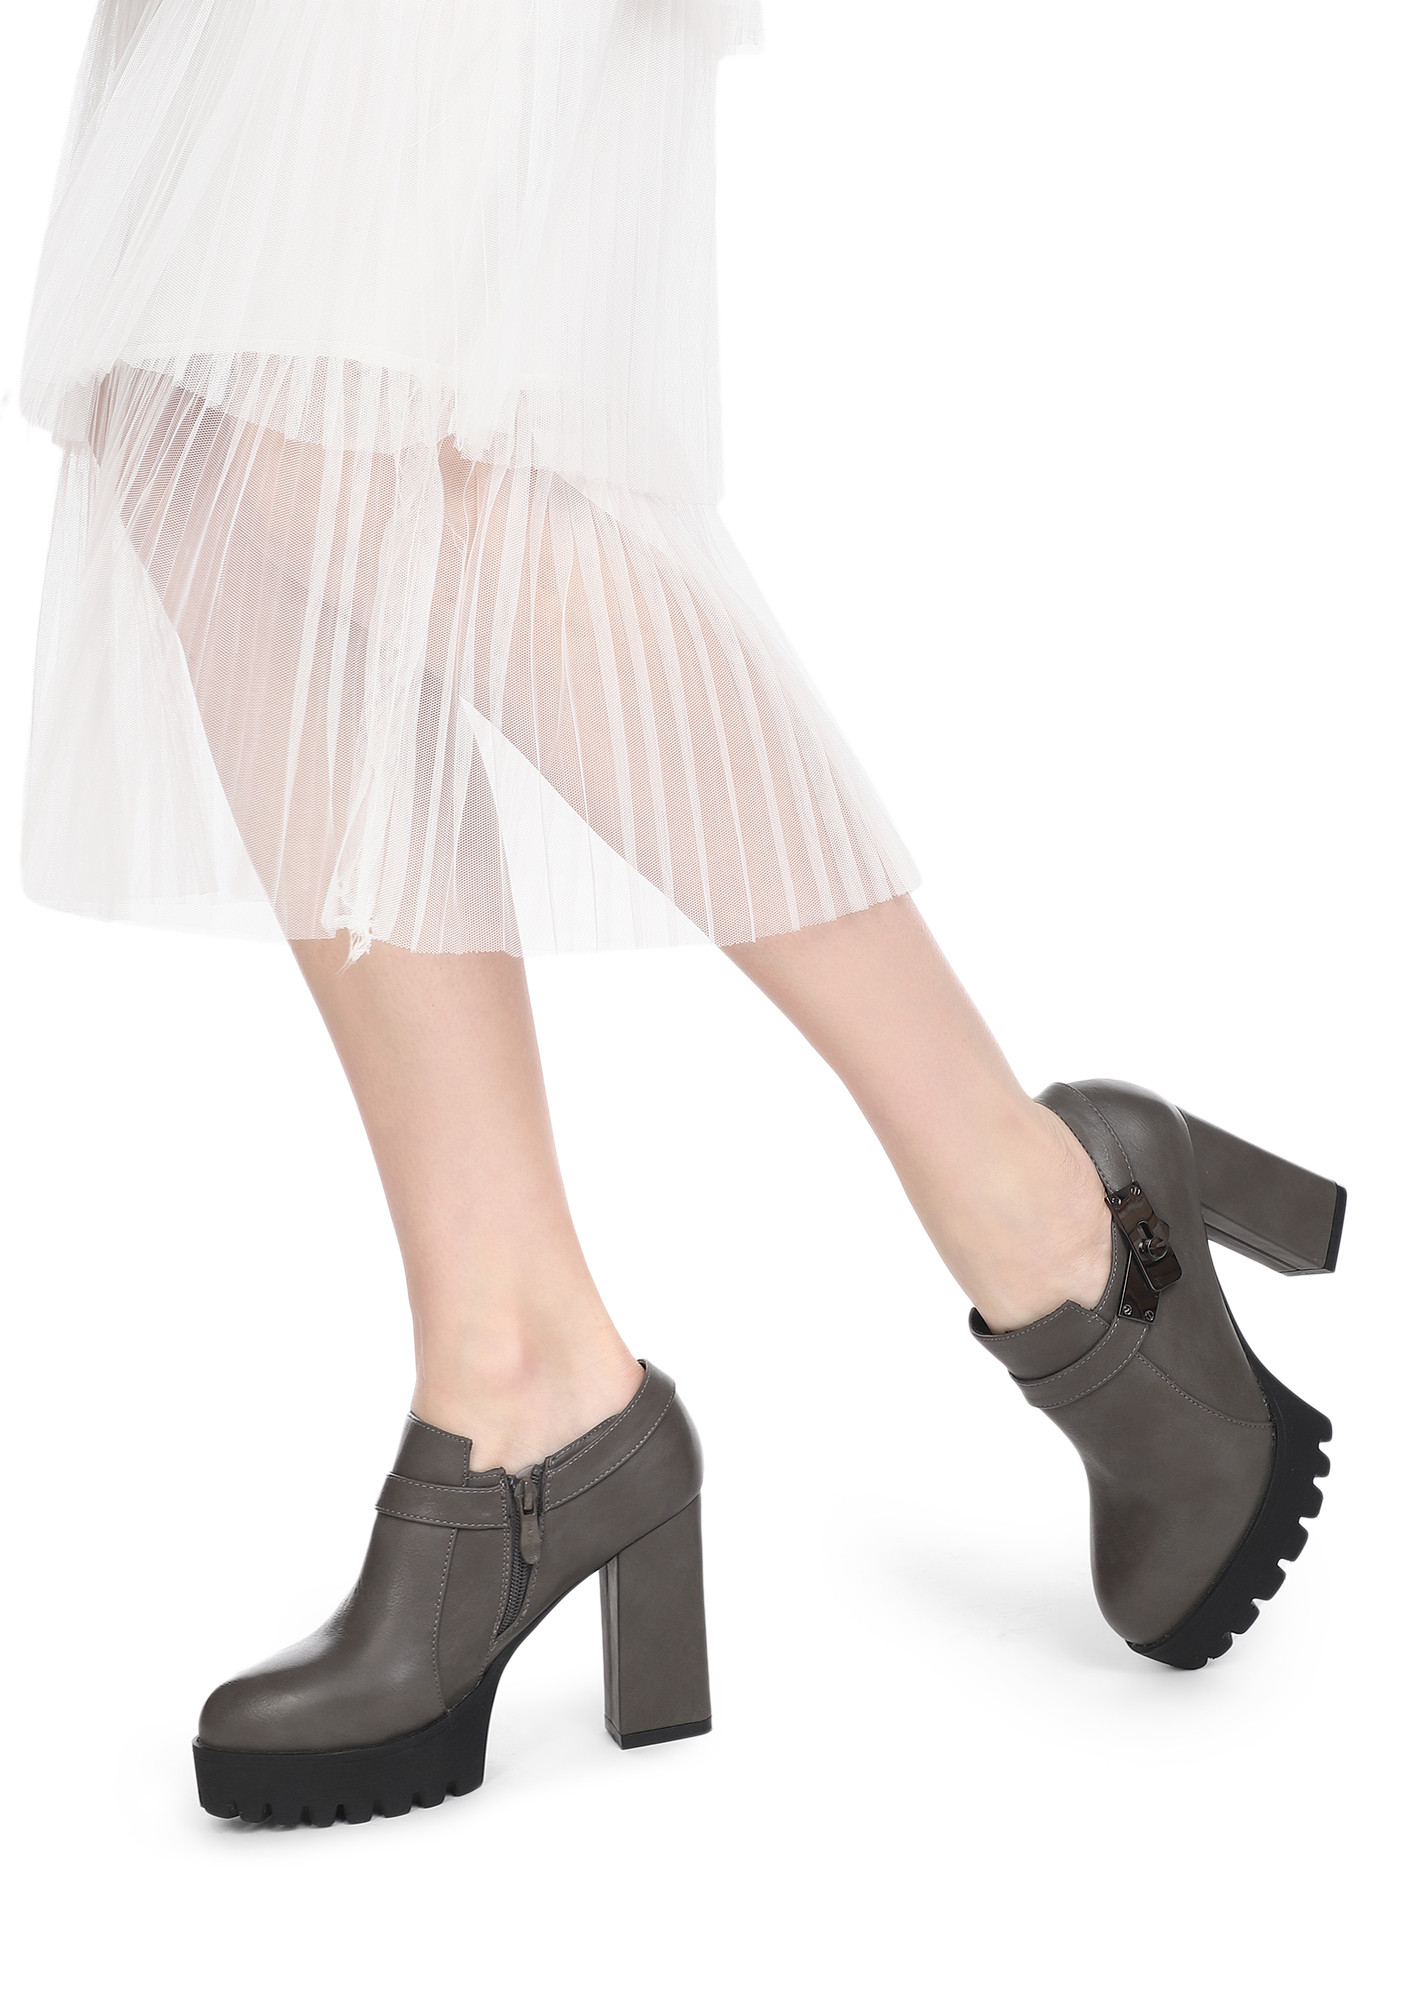 OFFICE TO HAPPY HOURS GREY ANKLE BOOTS